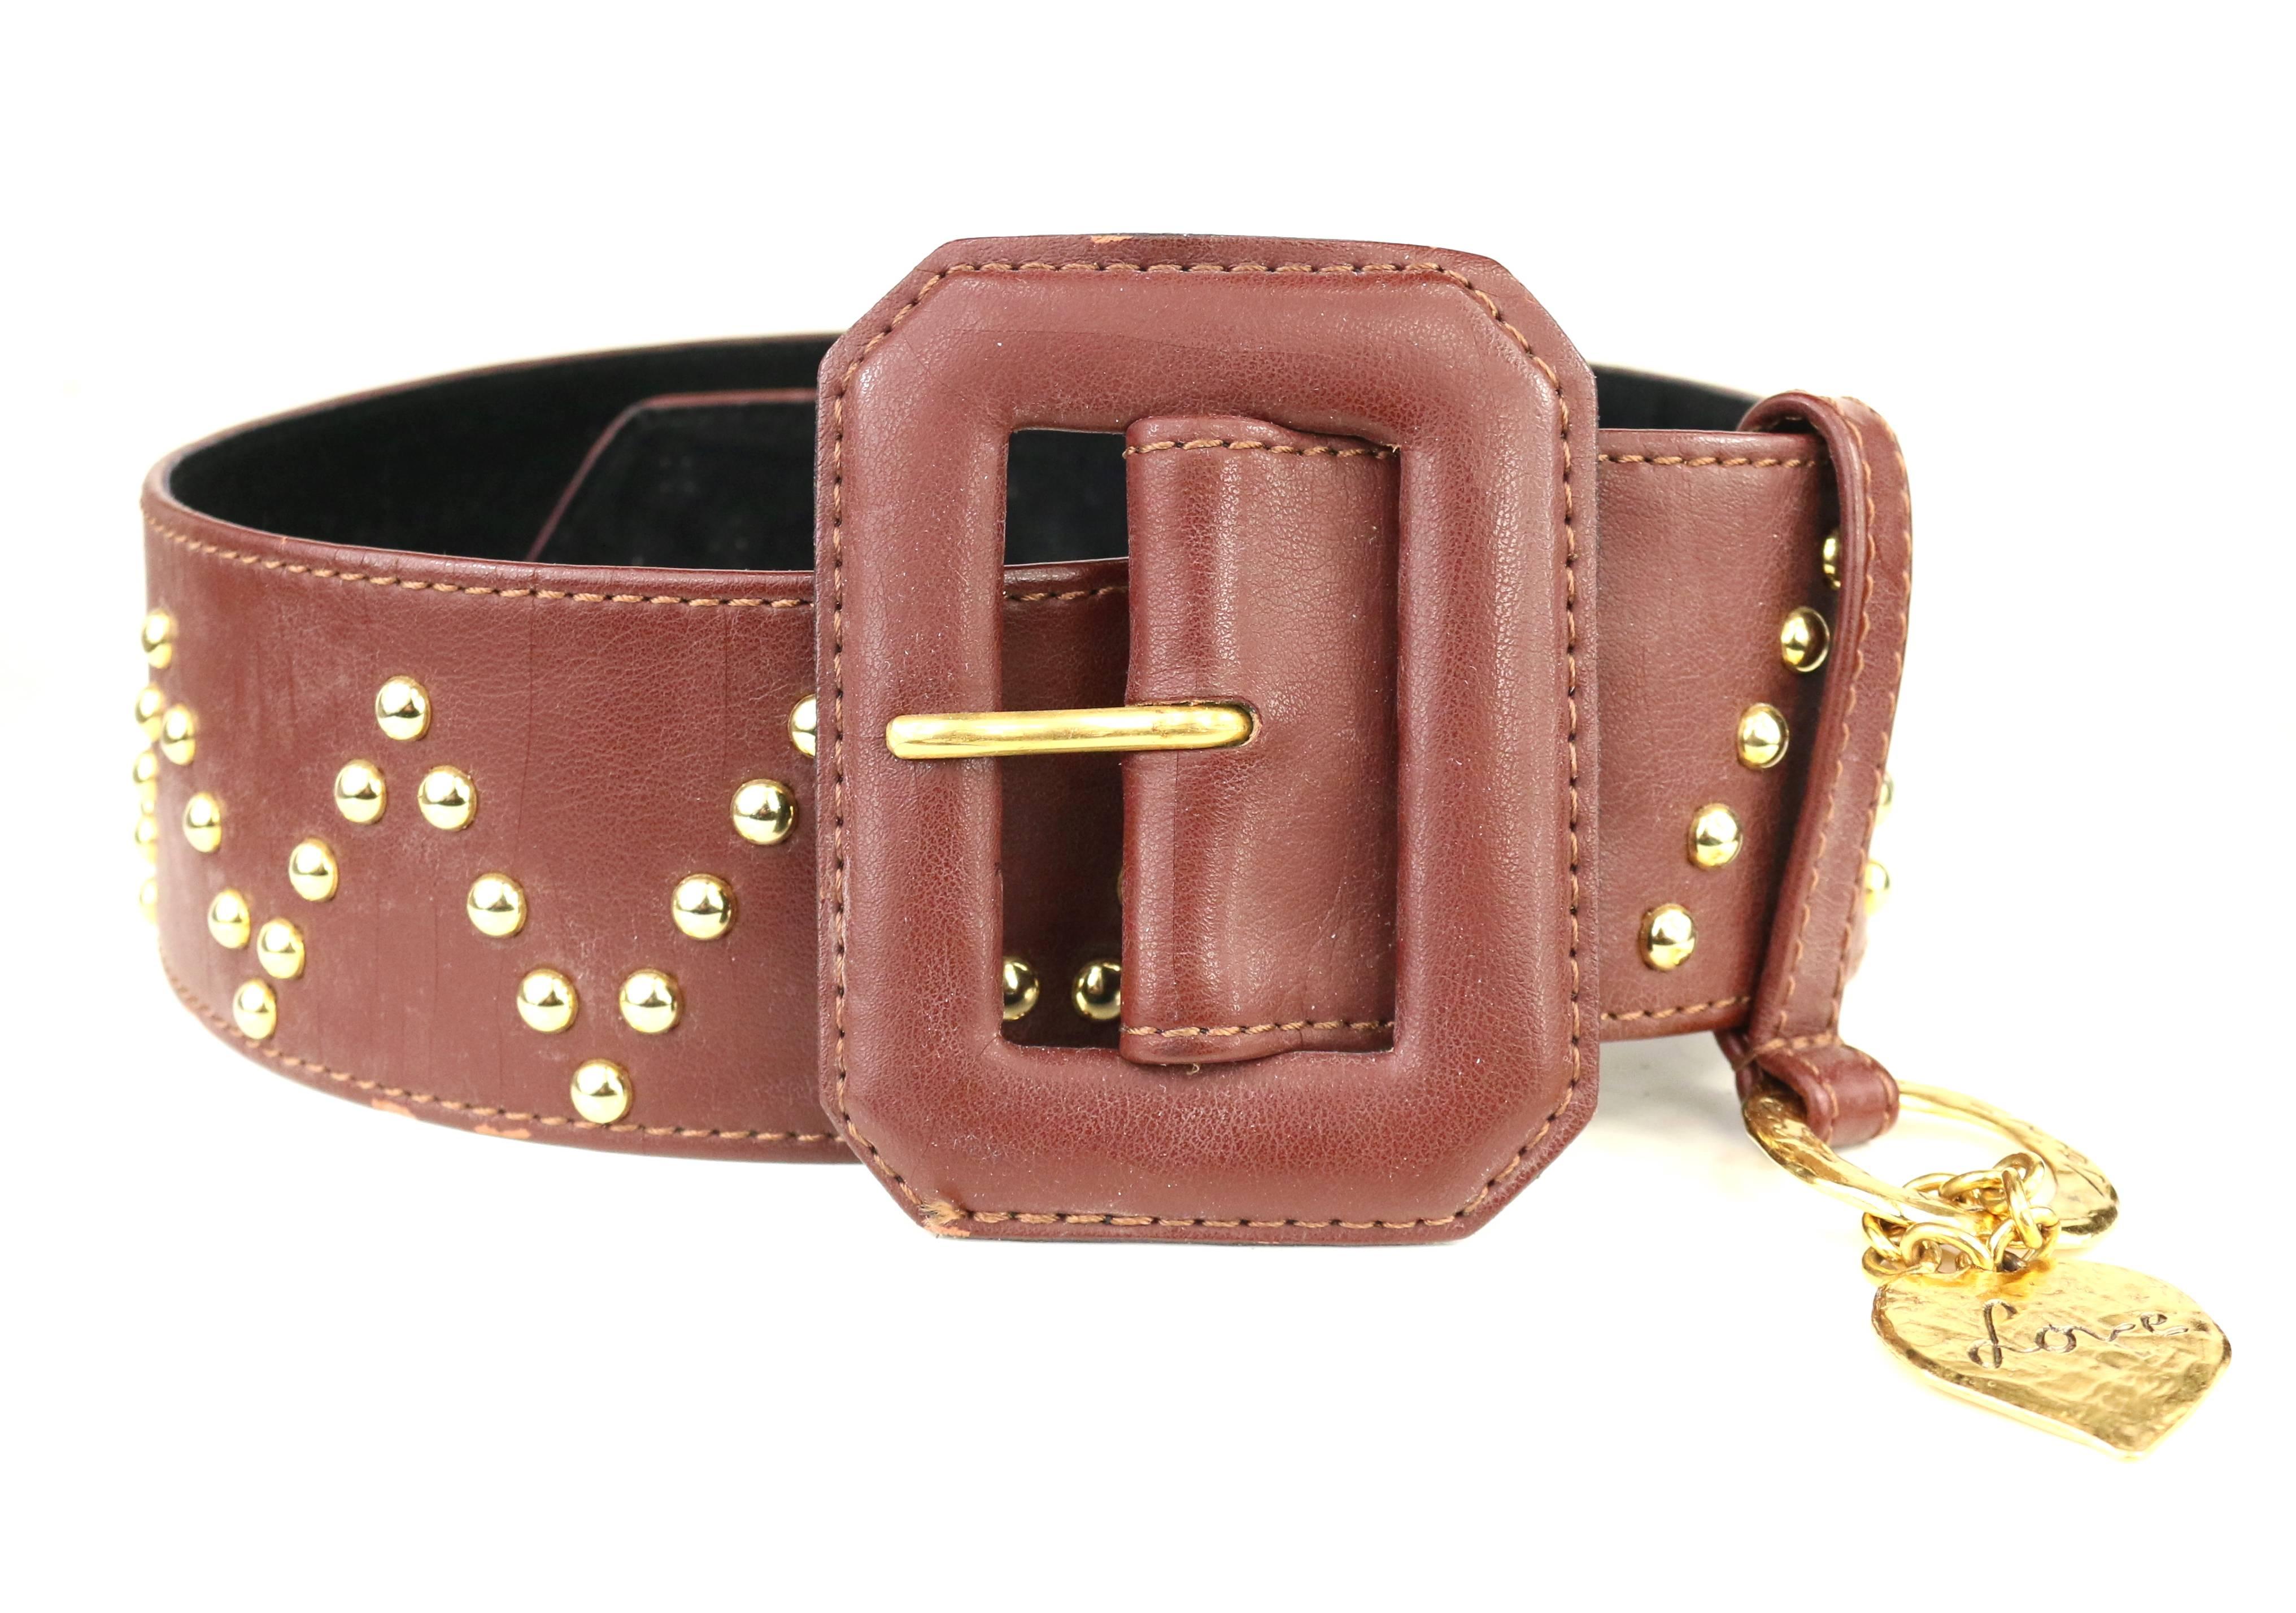 - Vintage Yves Saint Laurent brown leather with V shape gold-toned studs throughout the belt. 

- Featuring gold-toned heart shape hardware charm with 